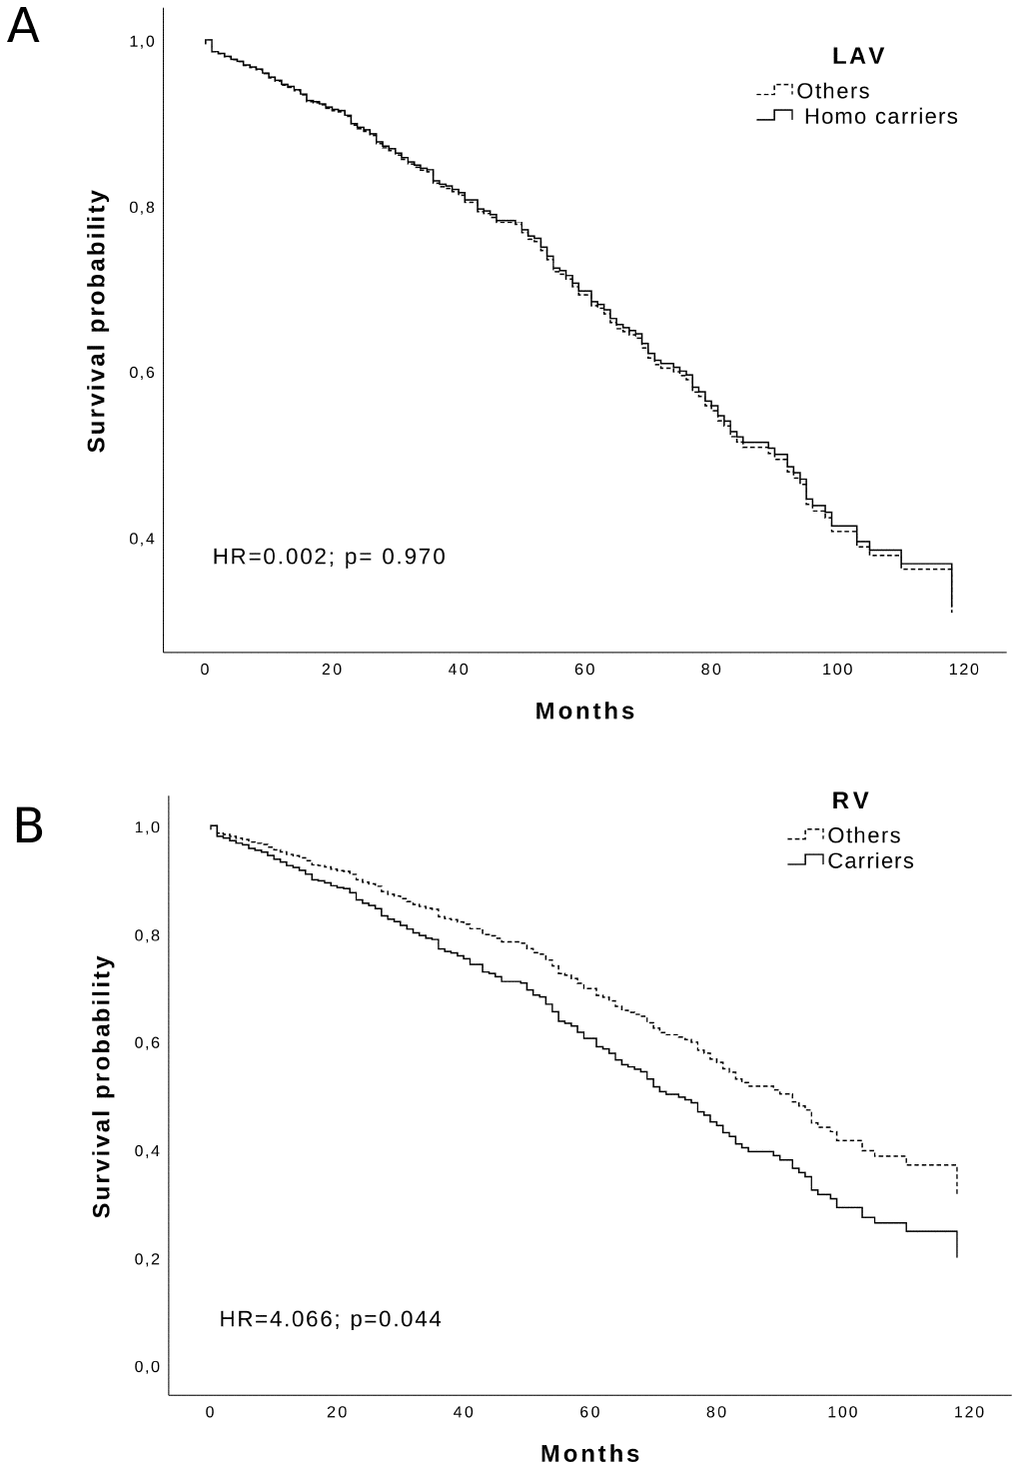 Survival function of: (A) LAV Homozygous carriers and (B) RV carriers (solid line) vs others (dotted line) in the Calabria cohort. Time is expressed in months, where 0 is considered the time of recruitment, and each individual is followed up for survival status till death. Adjusted HR and p-values are reported inside the Figure.